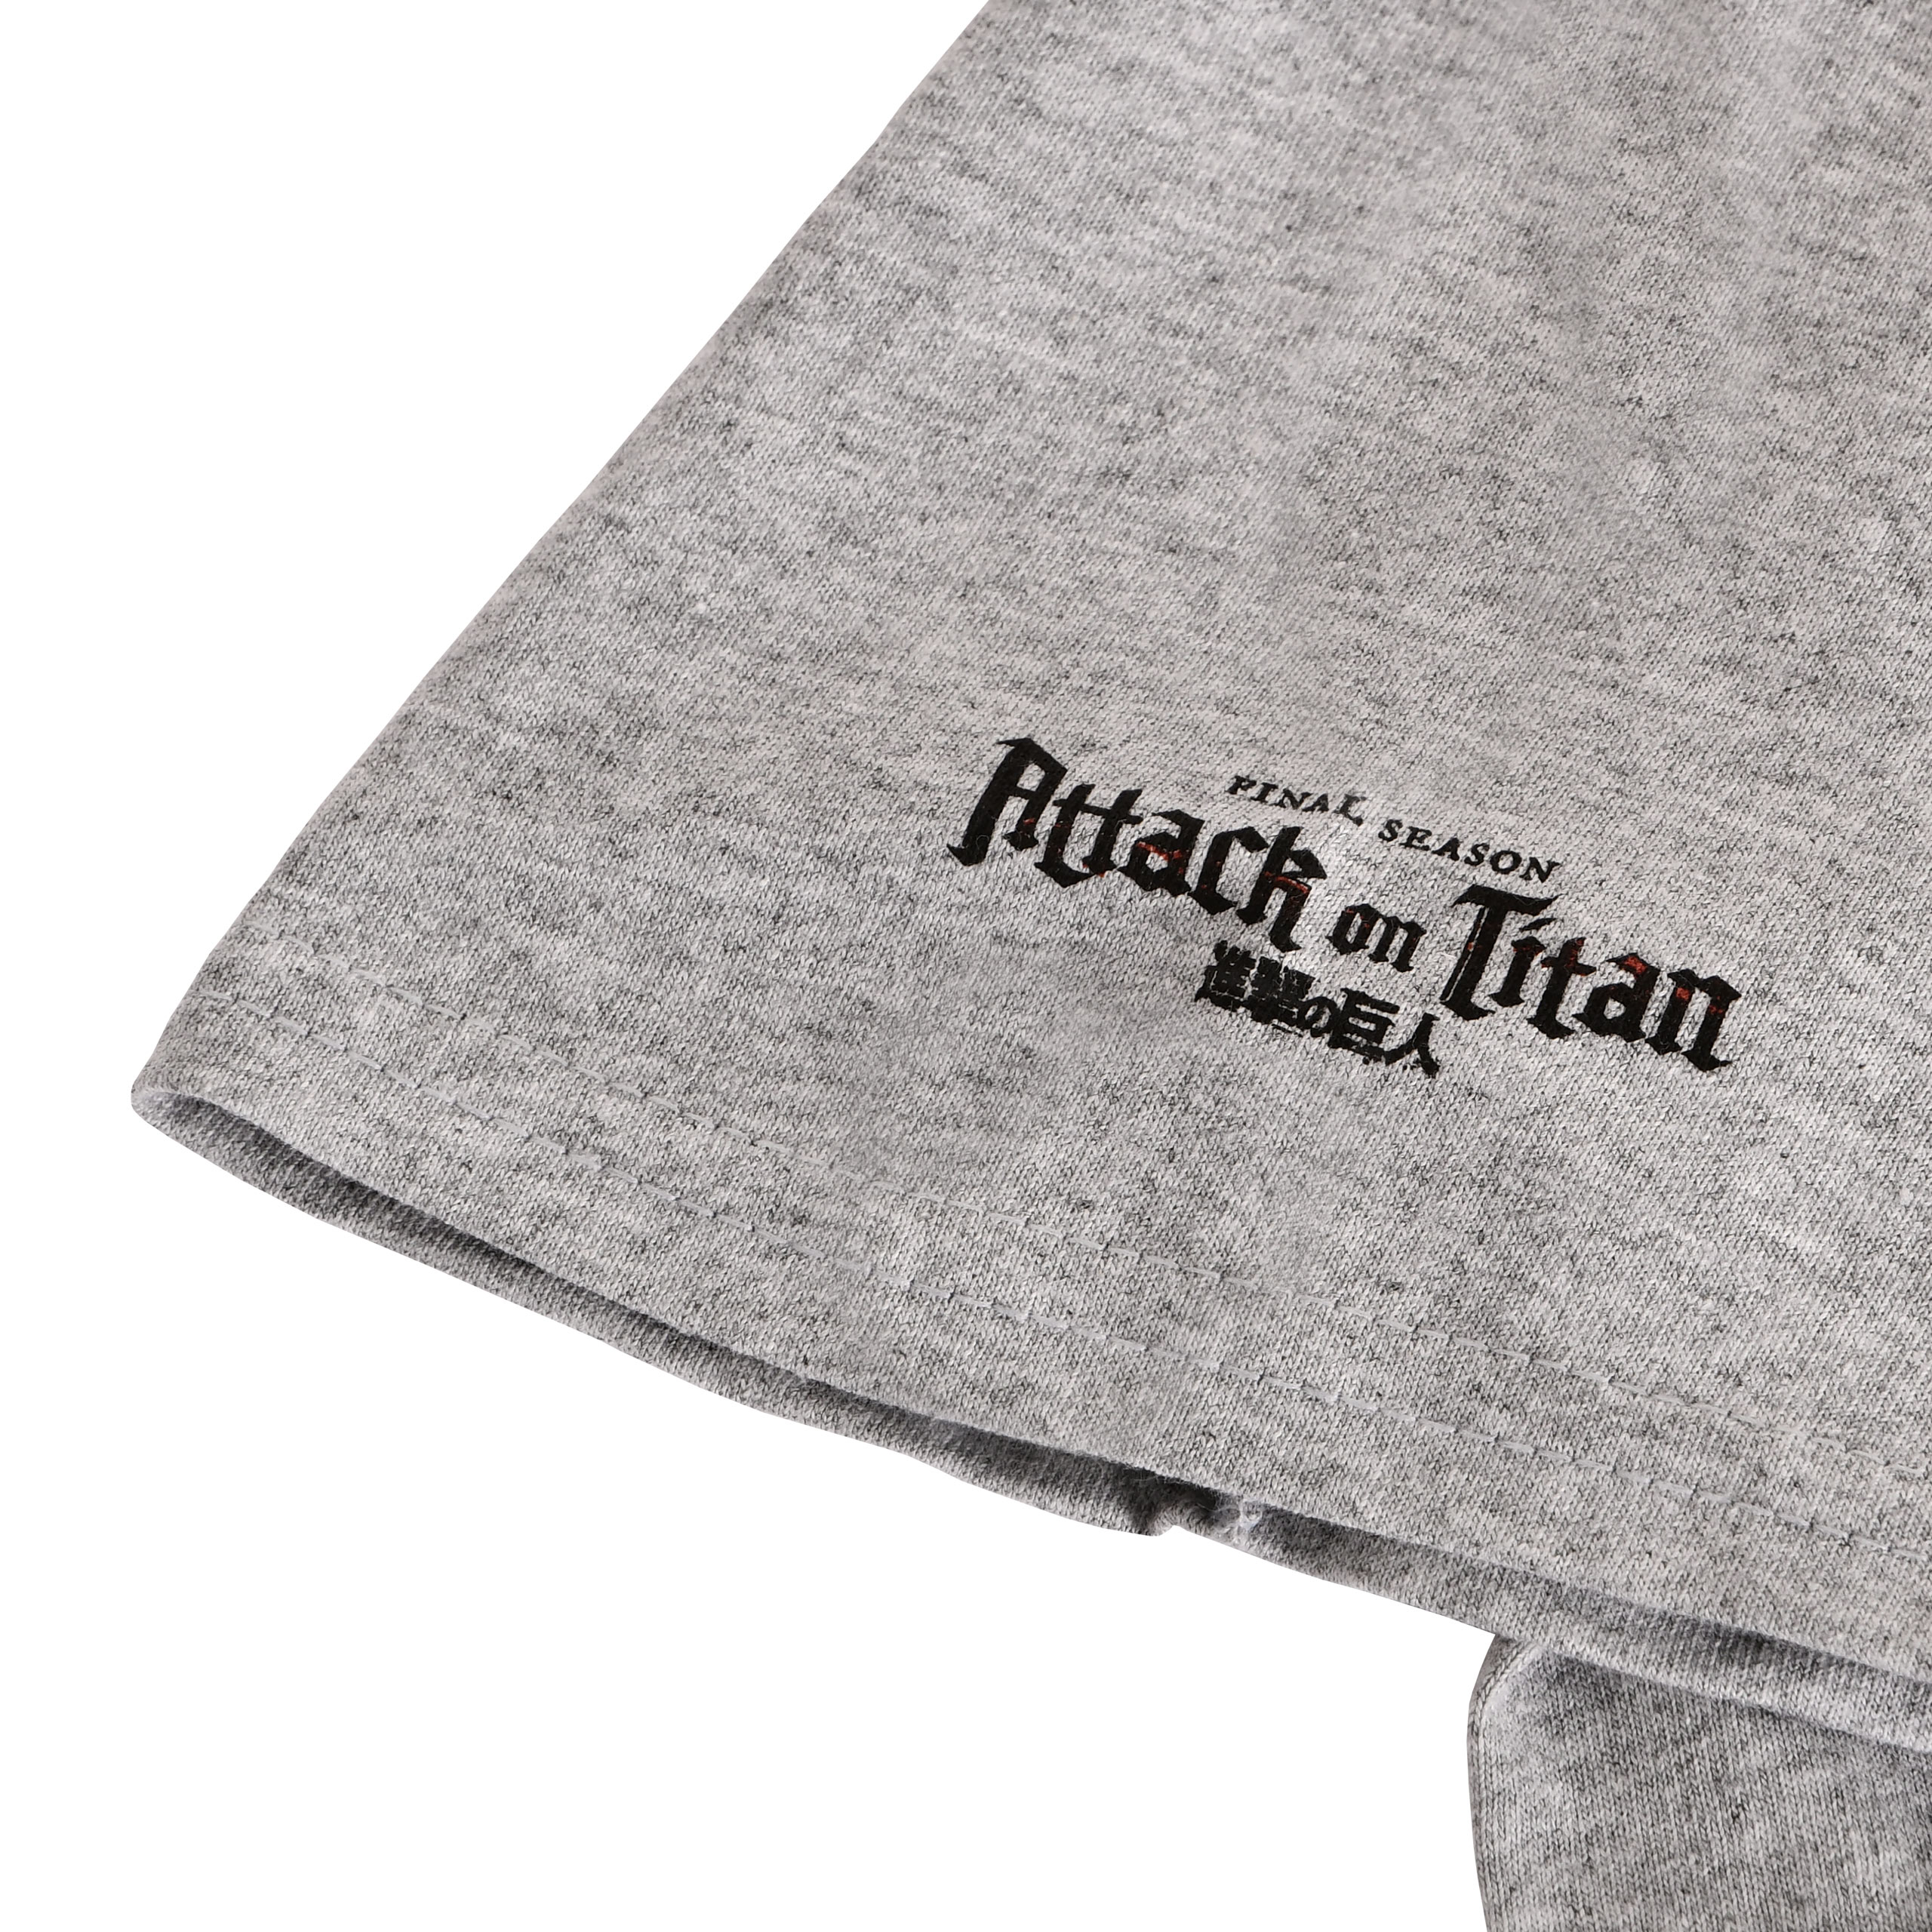 Attack on Titan - Group T-Shirt grey